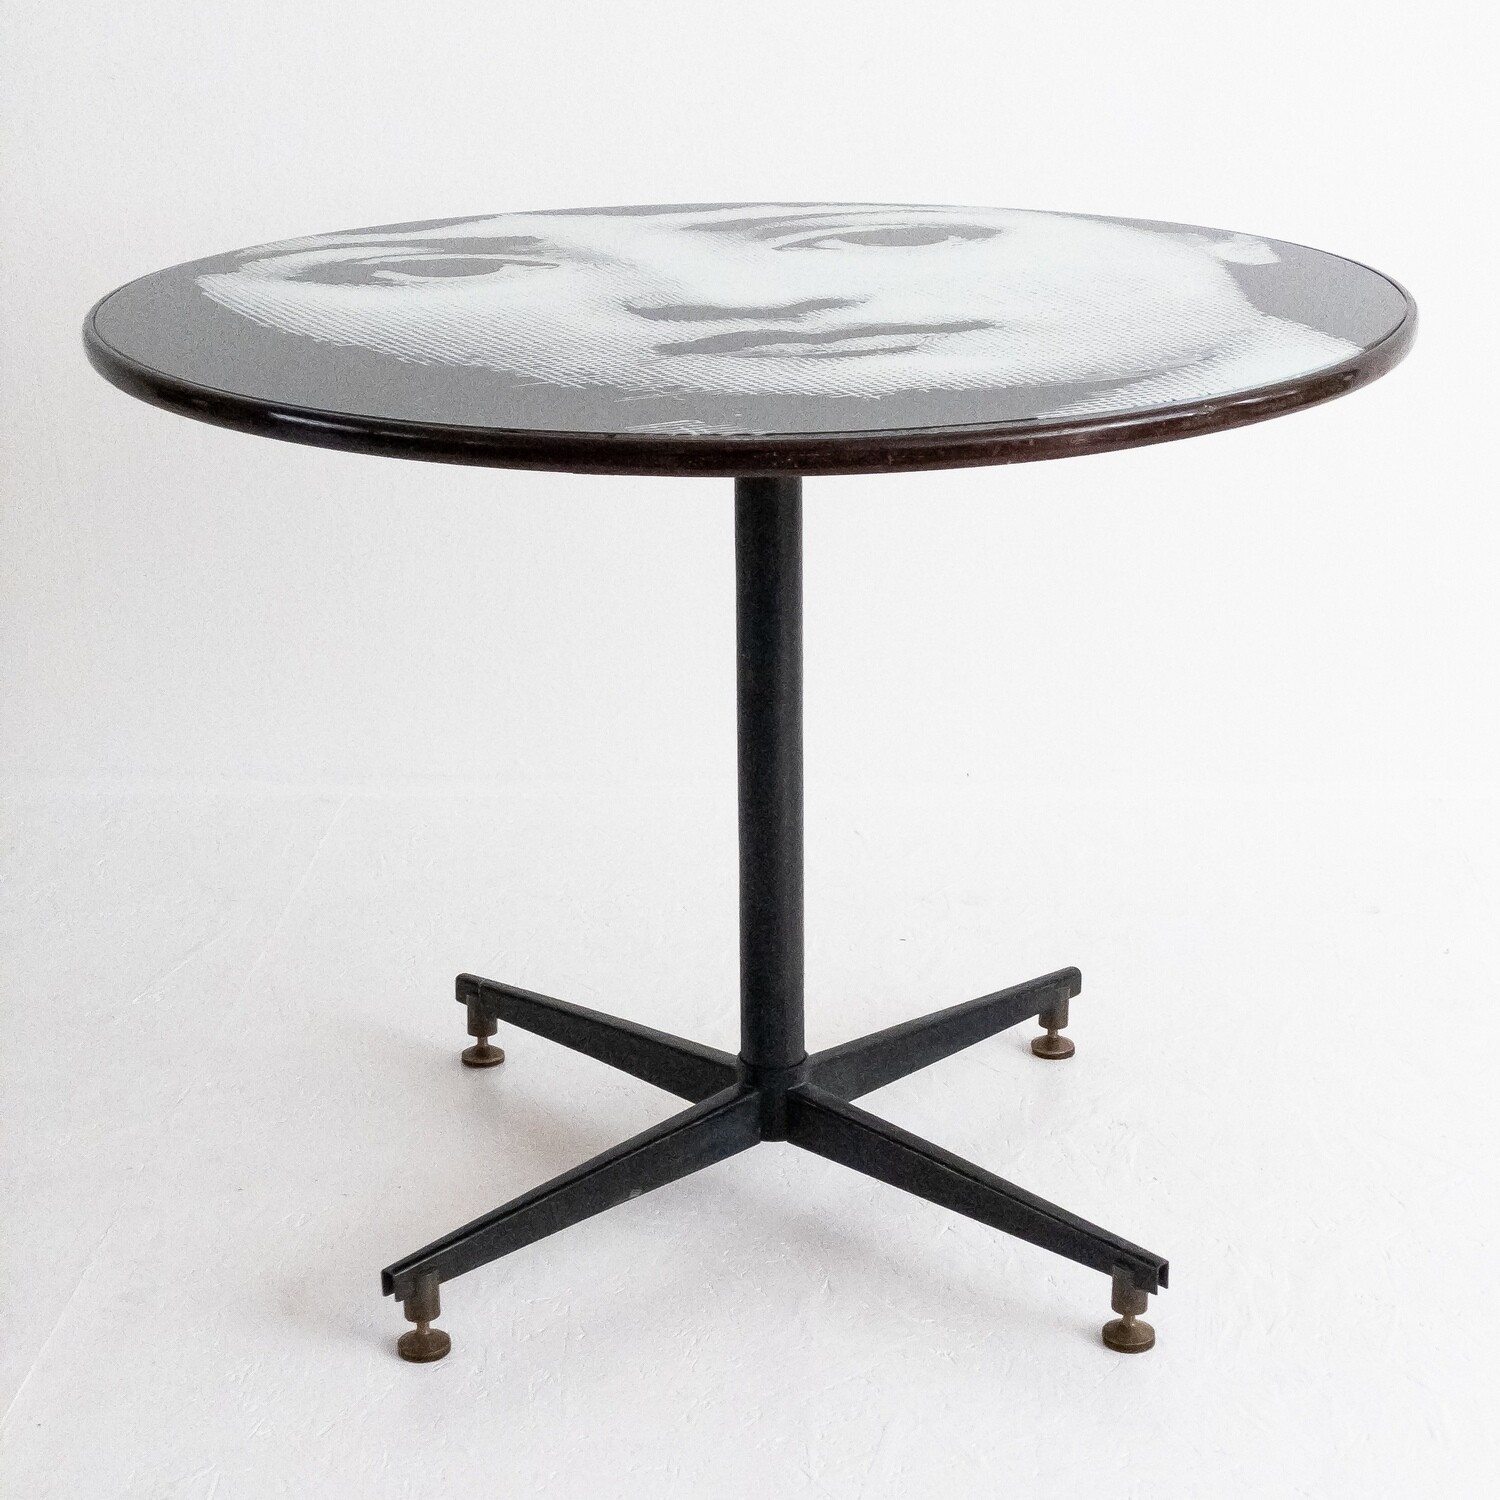 Round hand painted dining table, 1970s